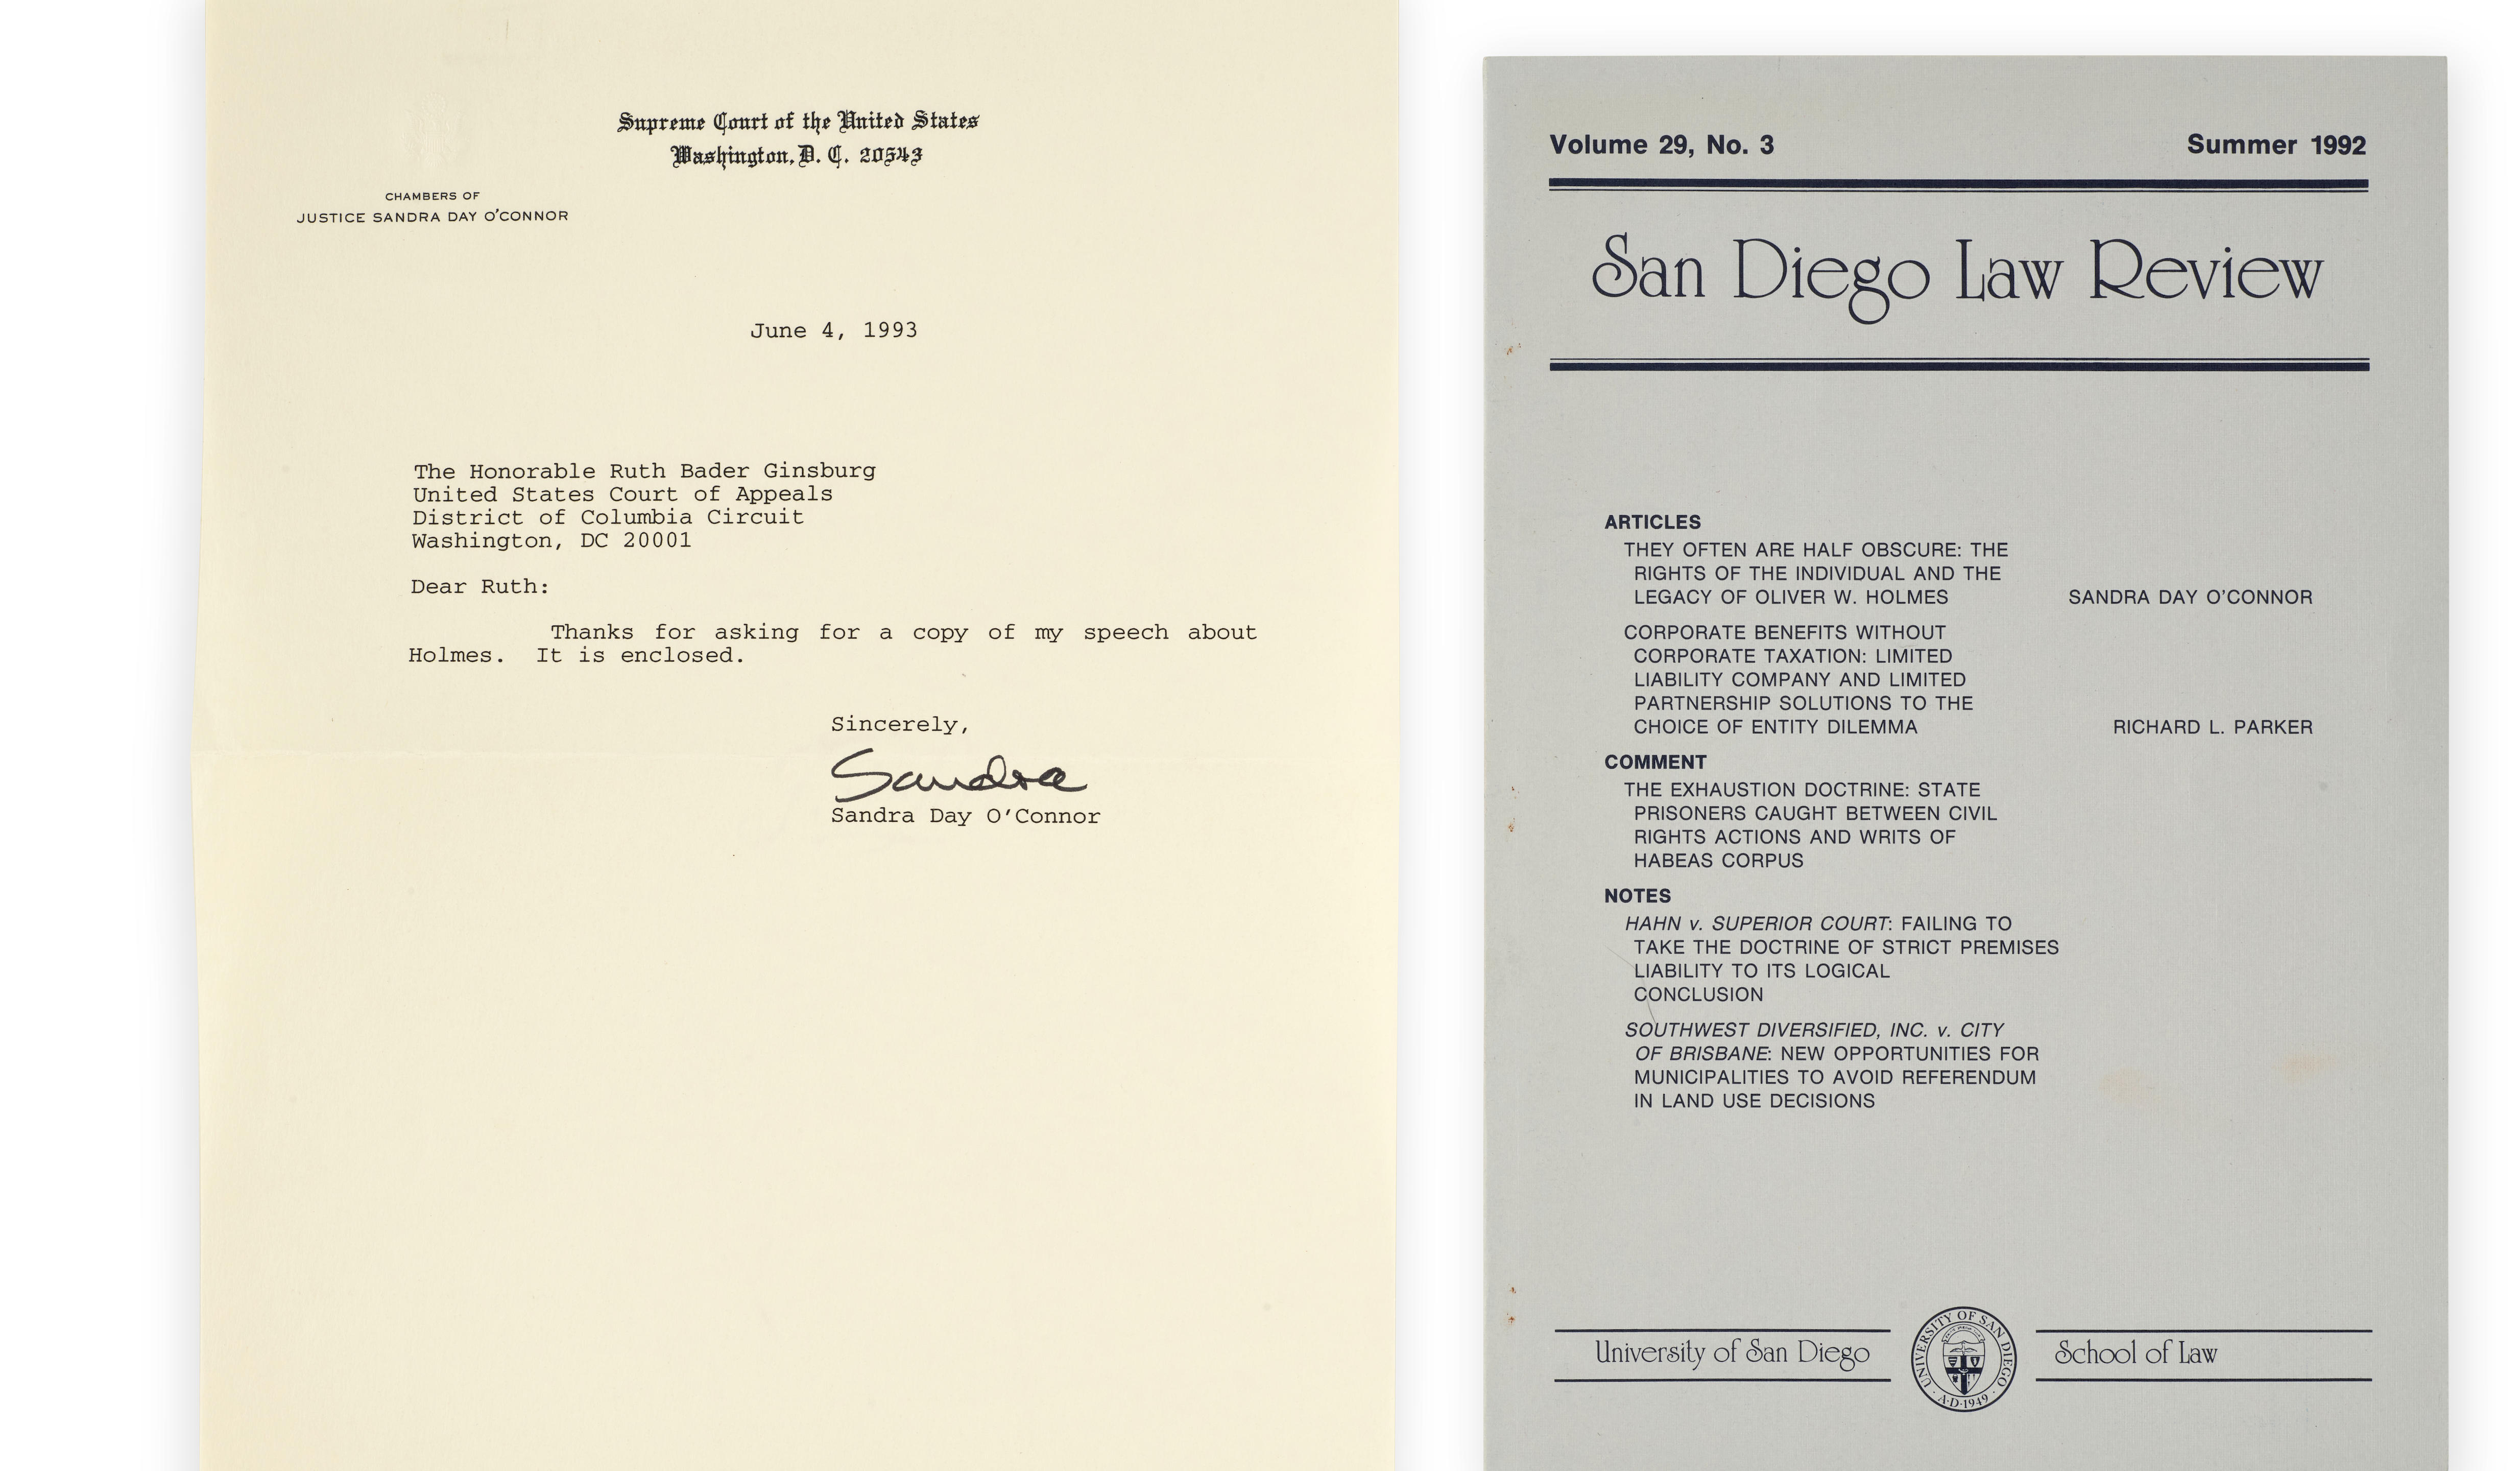 SANDRA DAY O'CONNOR PRESENTATION COPY TO RUTH BADER GINSBURG. "They Often Are Half Obscure: The Rights of the Individual and the Legacy of Olive Wendell Holmes." Offprint from San Diego Law Review, Vol 29:3 (1992).